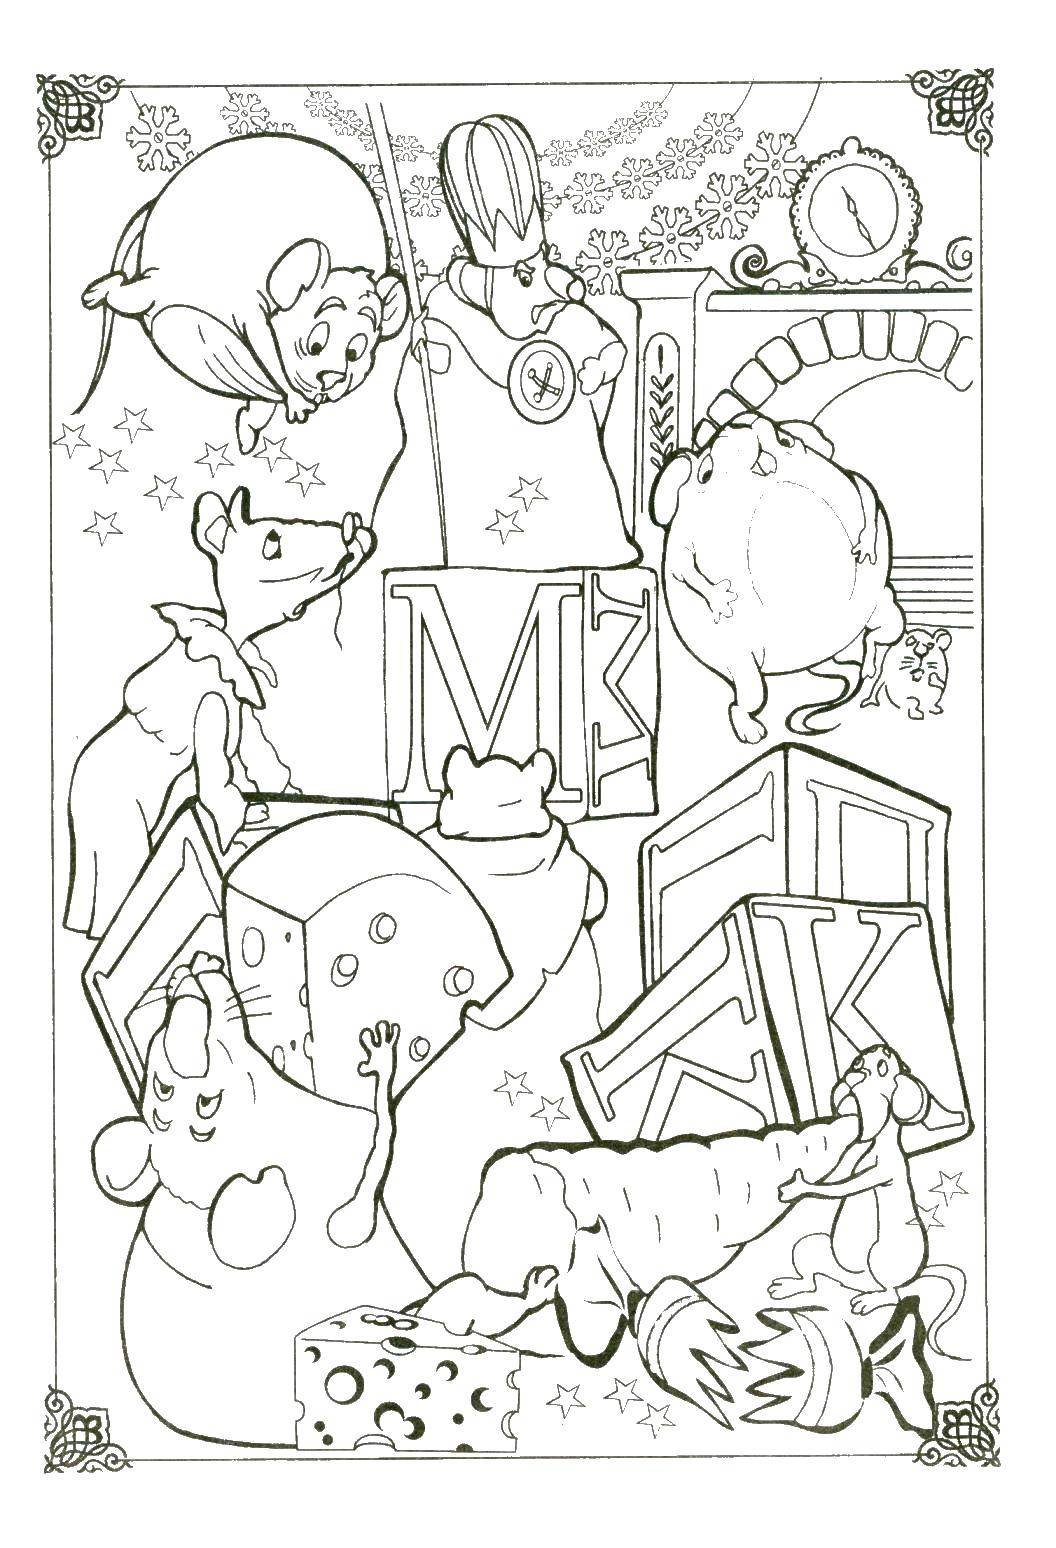 Coloring The mouse king and toy. Category the Nutcracker. Tags:  rat king cheese cubes.